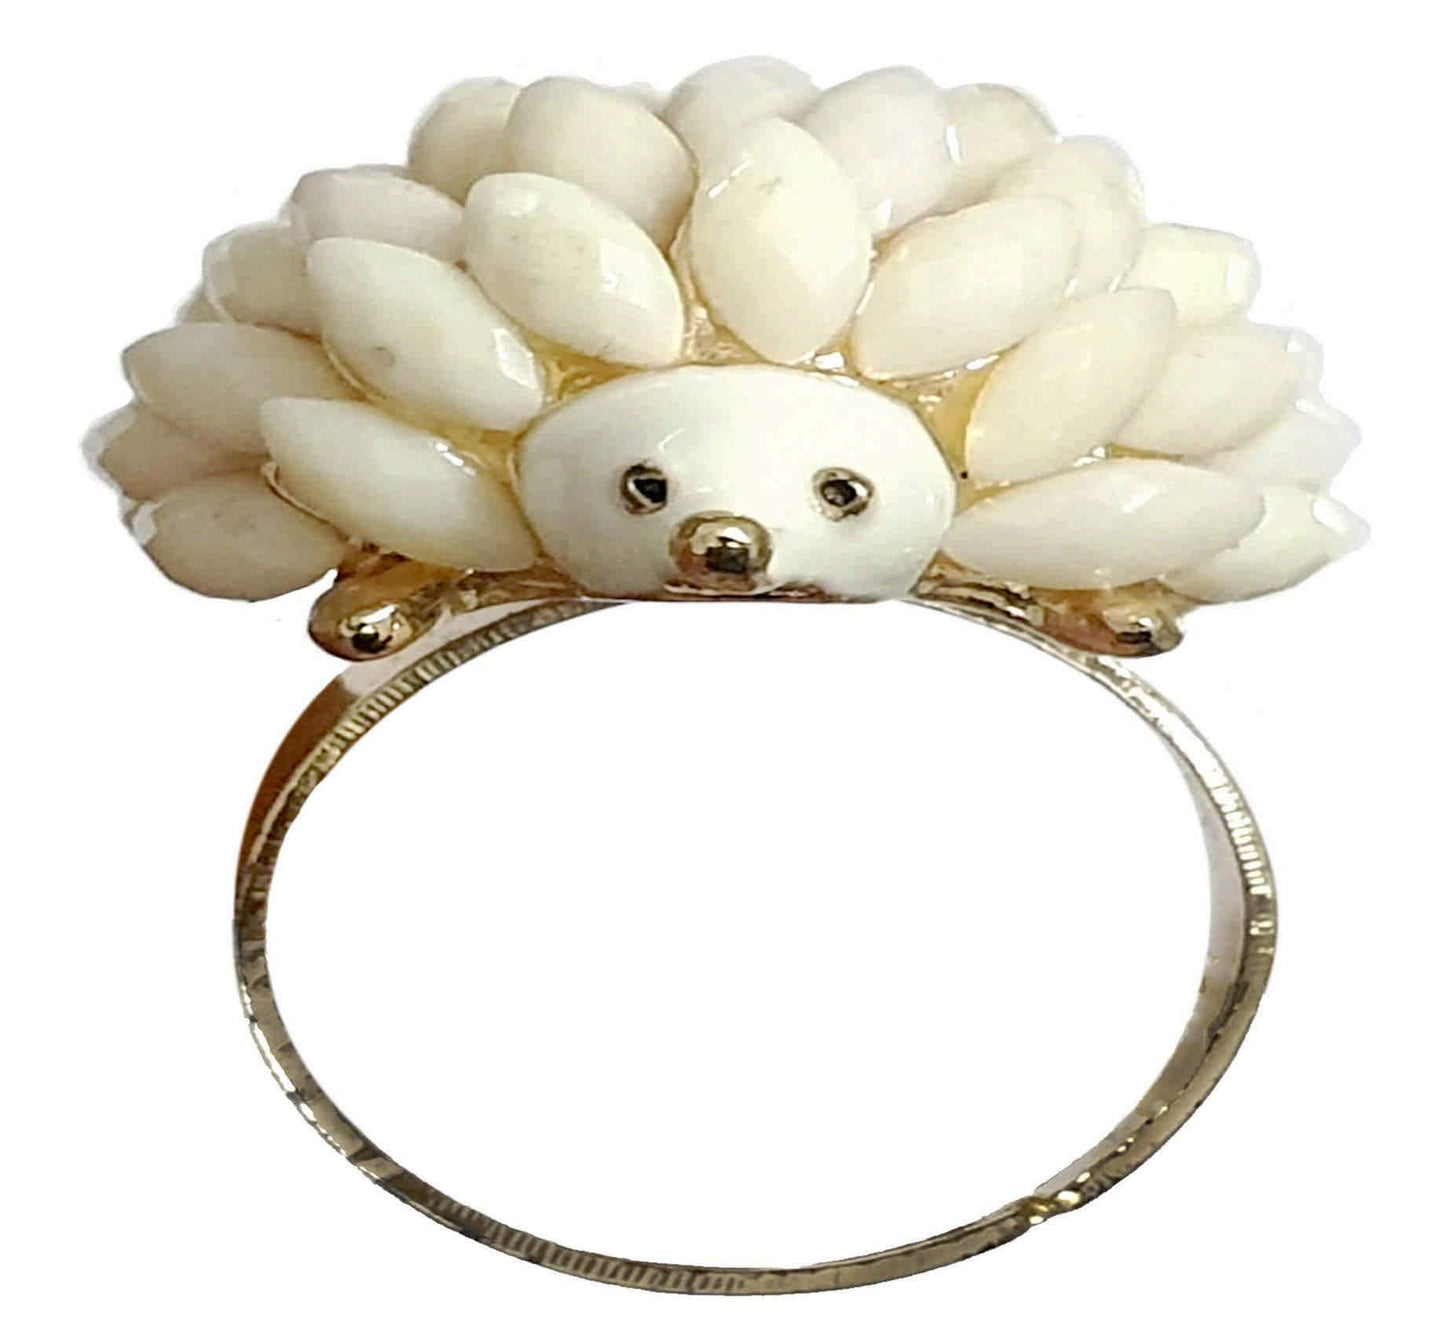 Indian Petals Rhinestone Pearls Studded Porcupine Design Imitation Artificial Metal Polished Animal Ring for Girls - #Indian Petals#